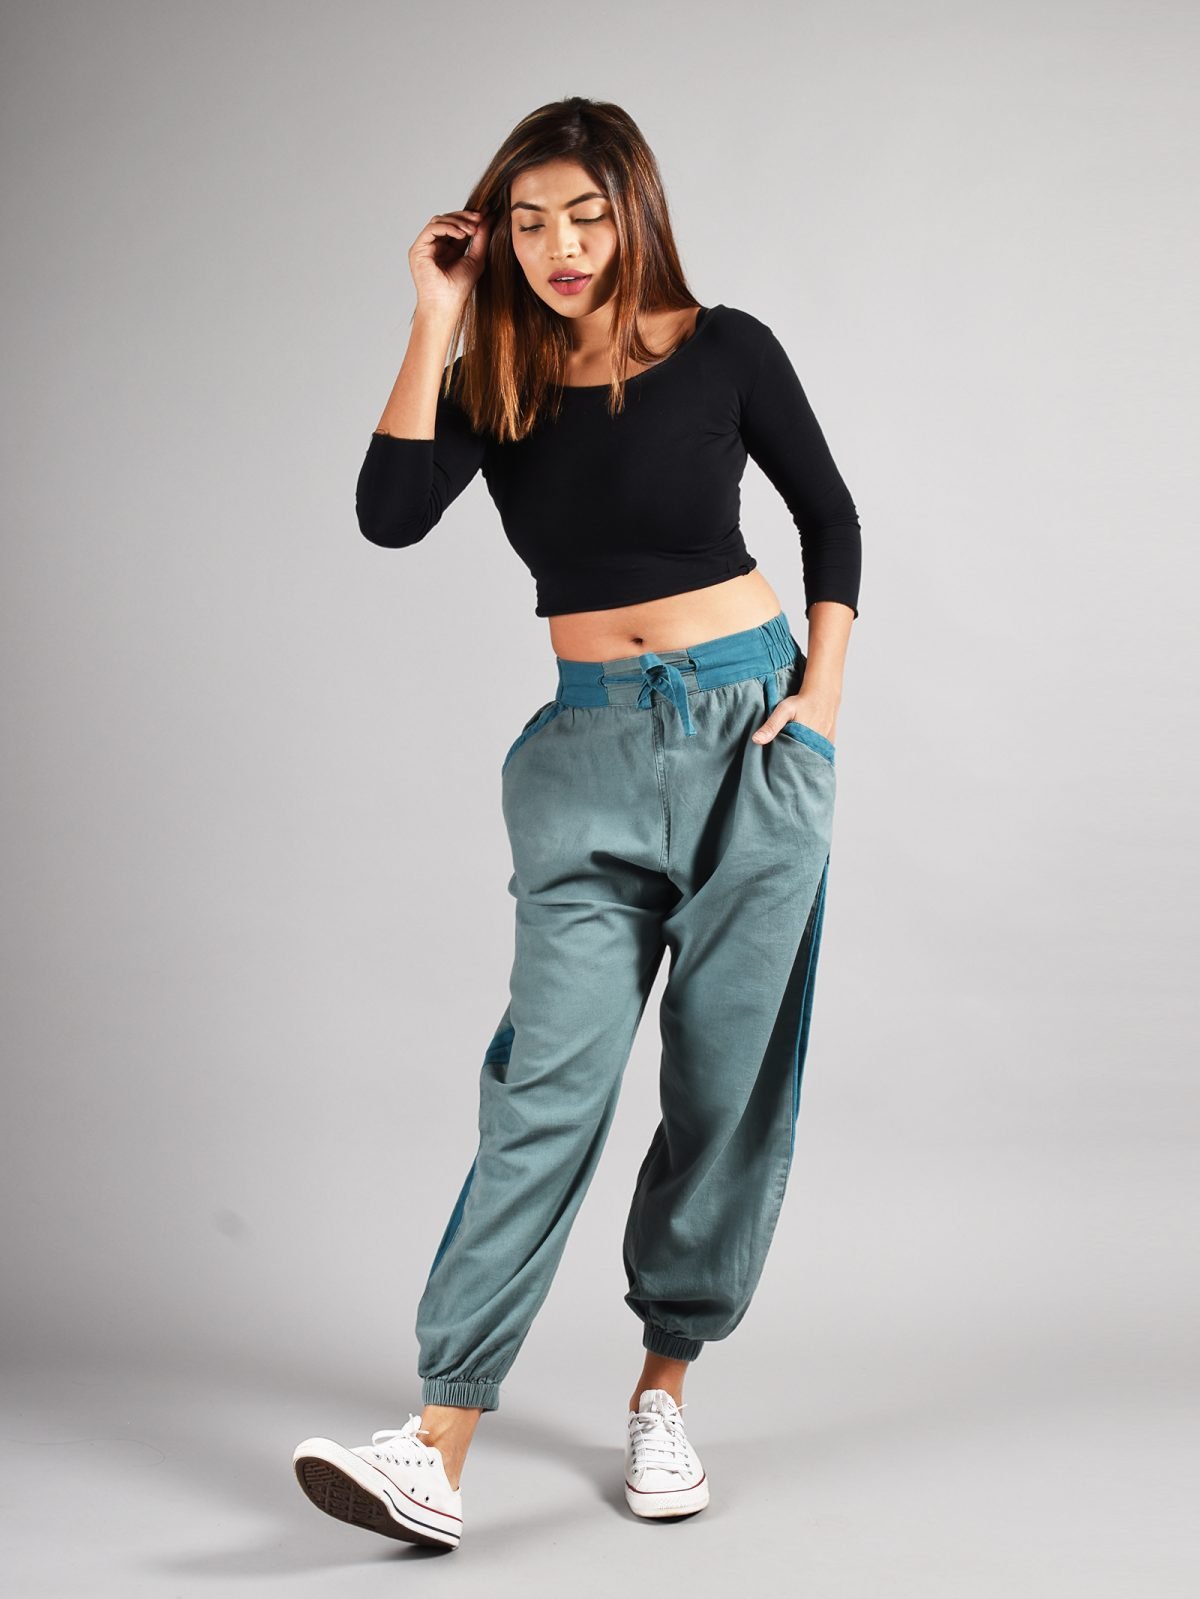 ladies joggers  by Bombay Trooper